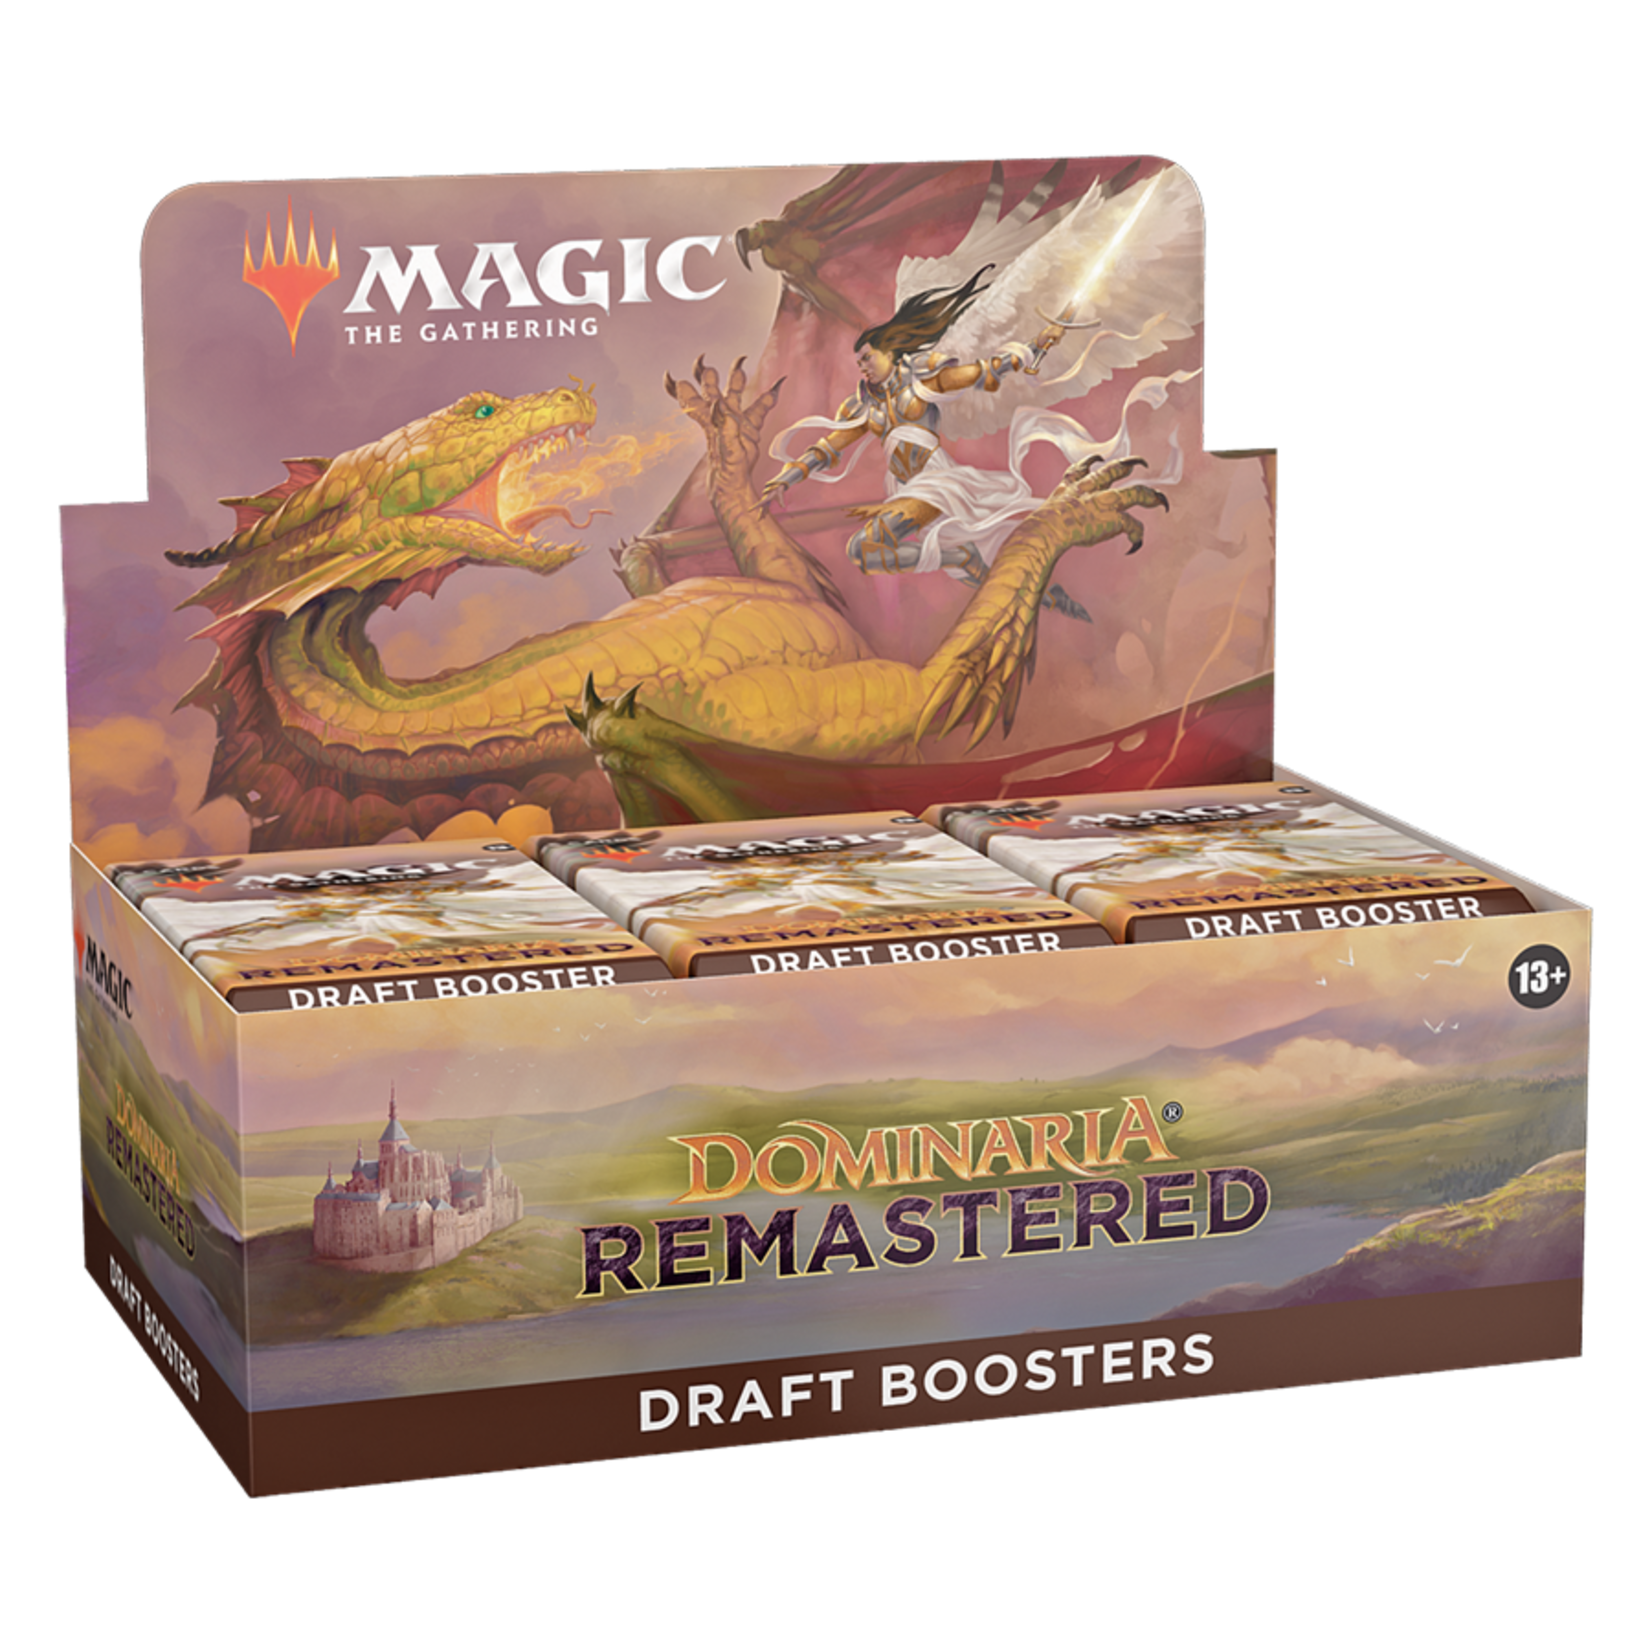 Wizards of the Coast Magic the Gathering: Dominaria Remastered - Draft Booster Box